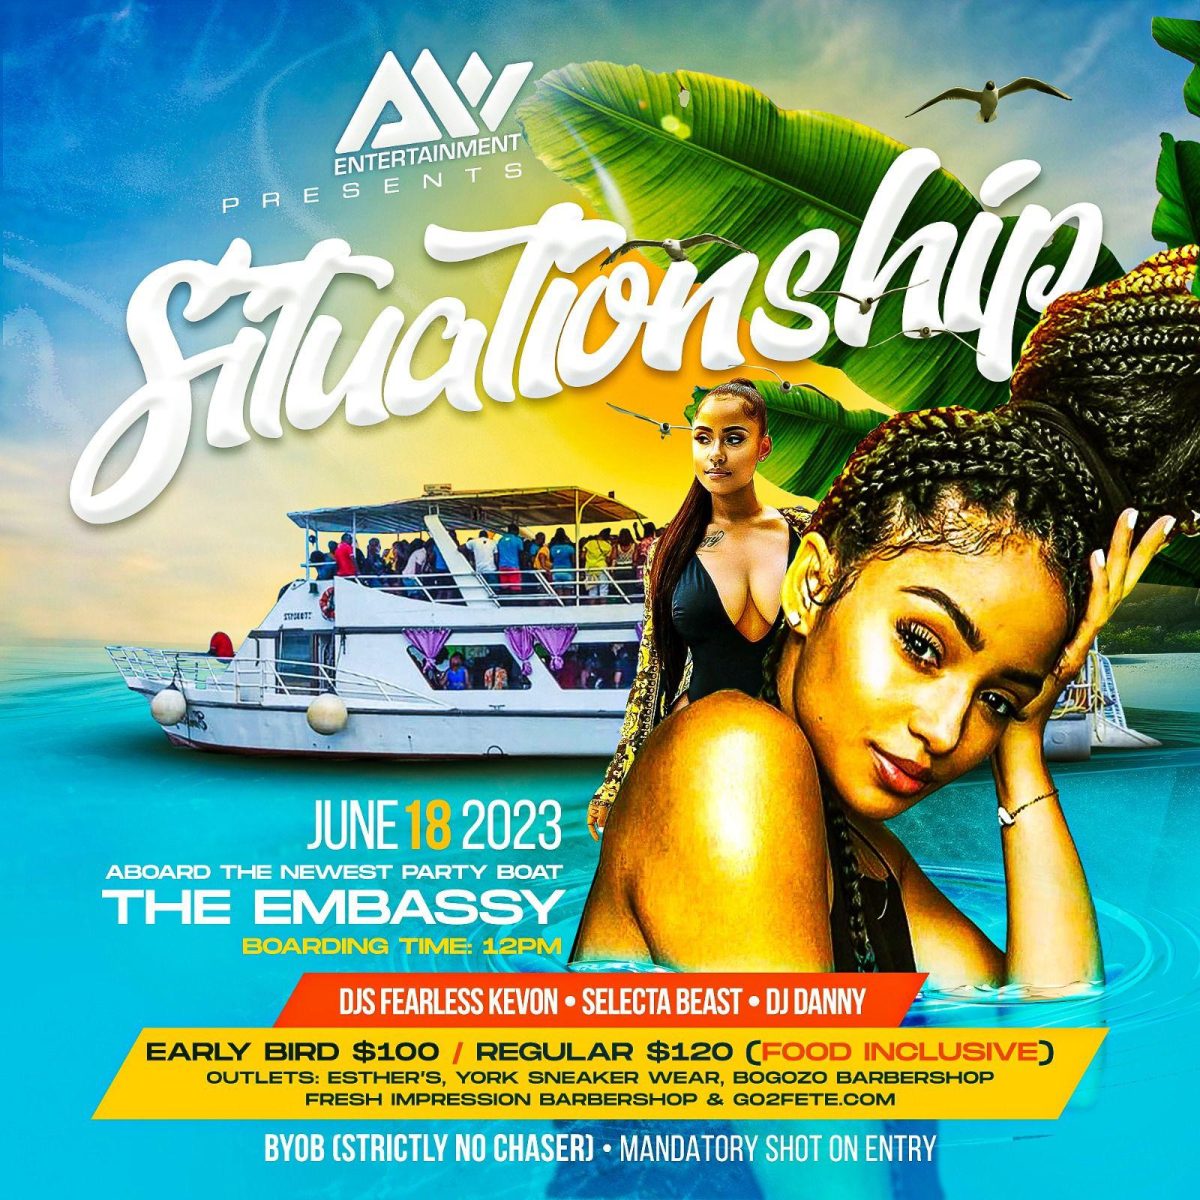 Situationship Day Cruise